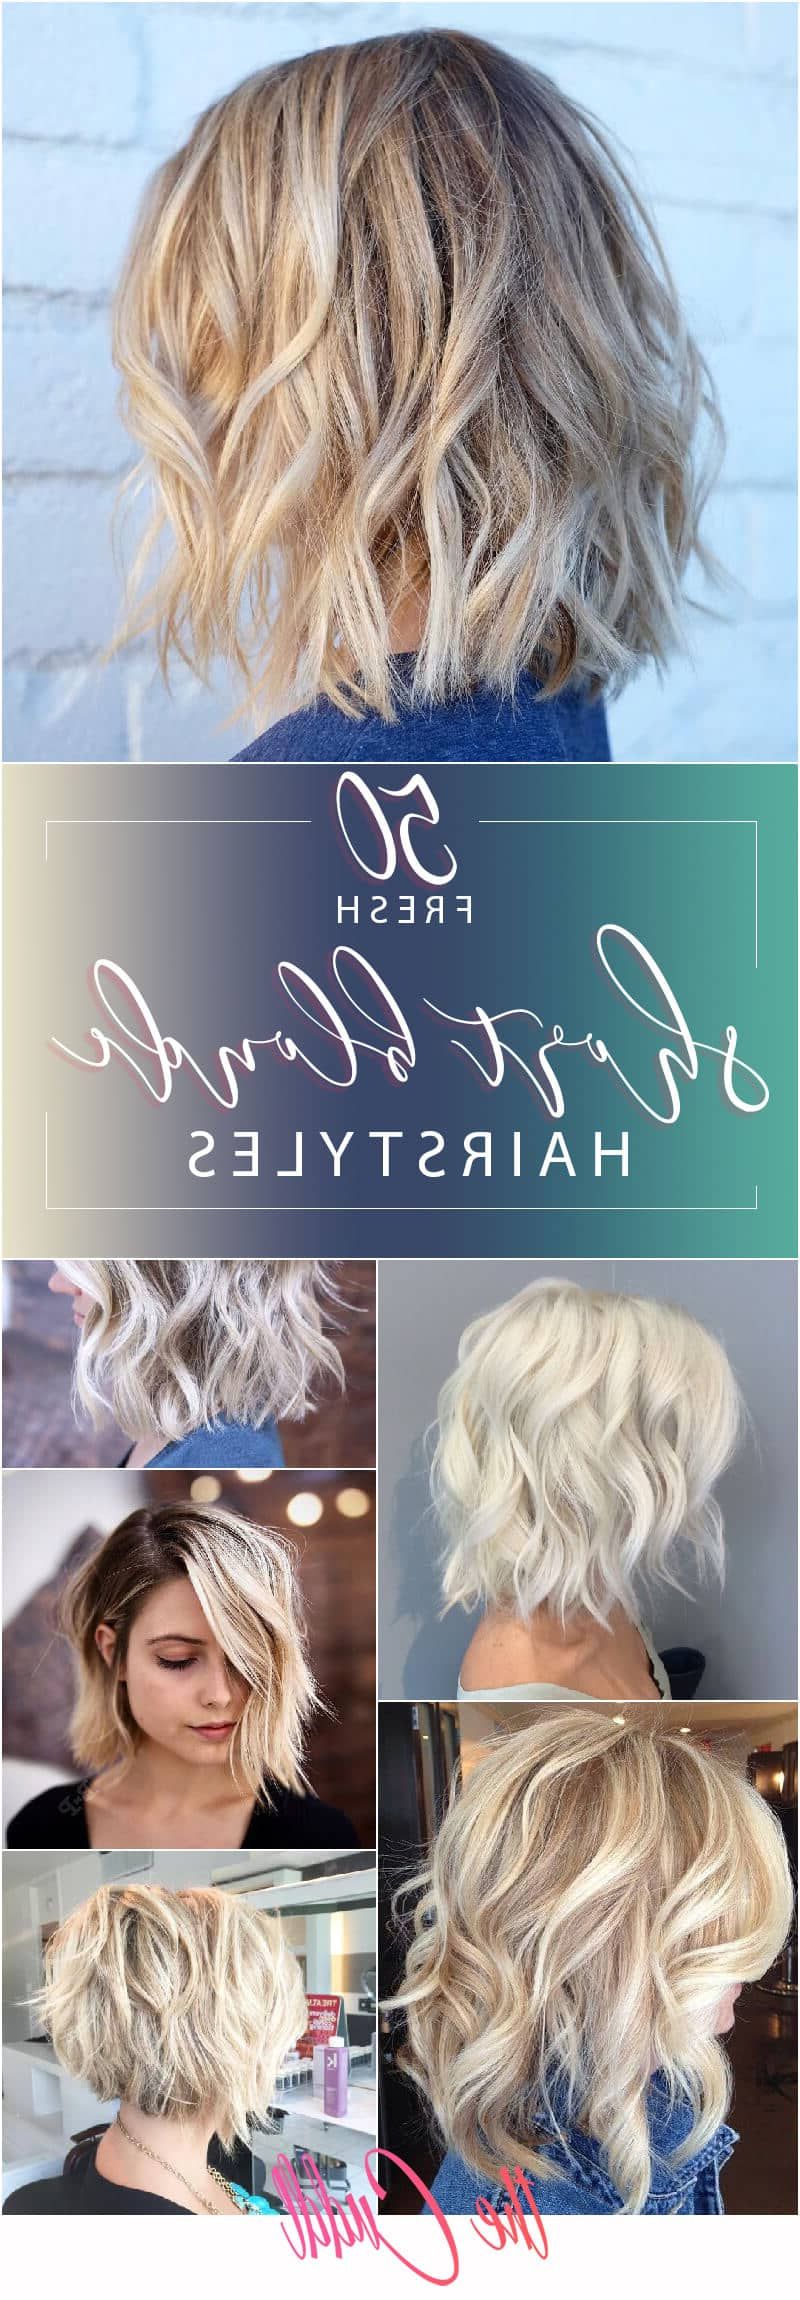 50 Fresh Short Blonde Hair Ideas To Update Your Style In 2019 Throughout Most Up To Date Long Dynamic Metallic Blonde Shag Haircuts (View 9 of 20)